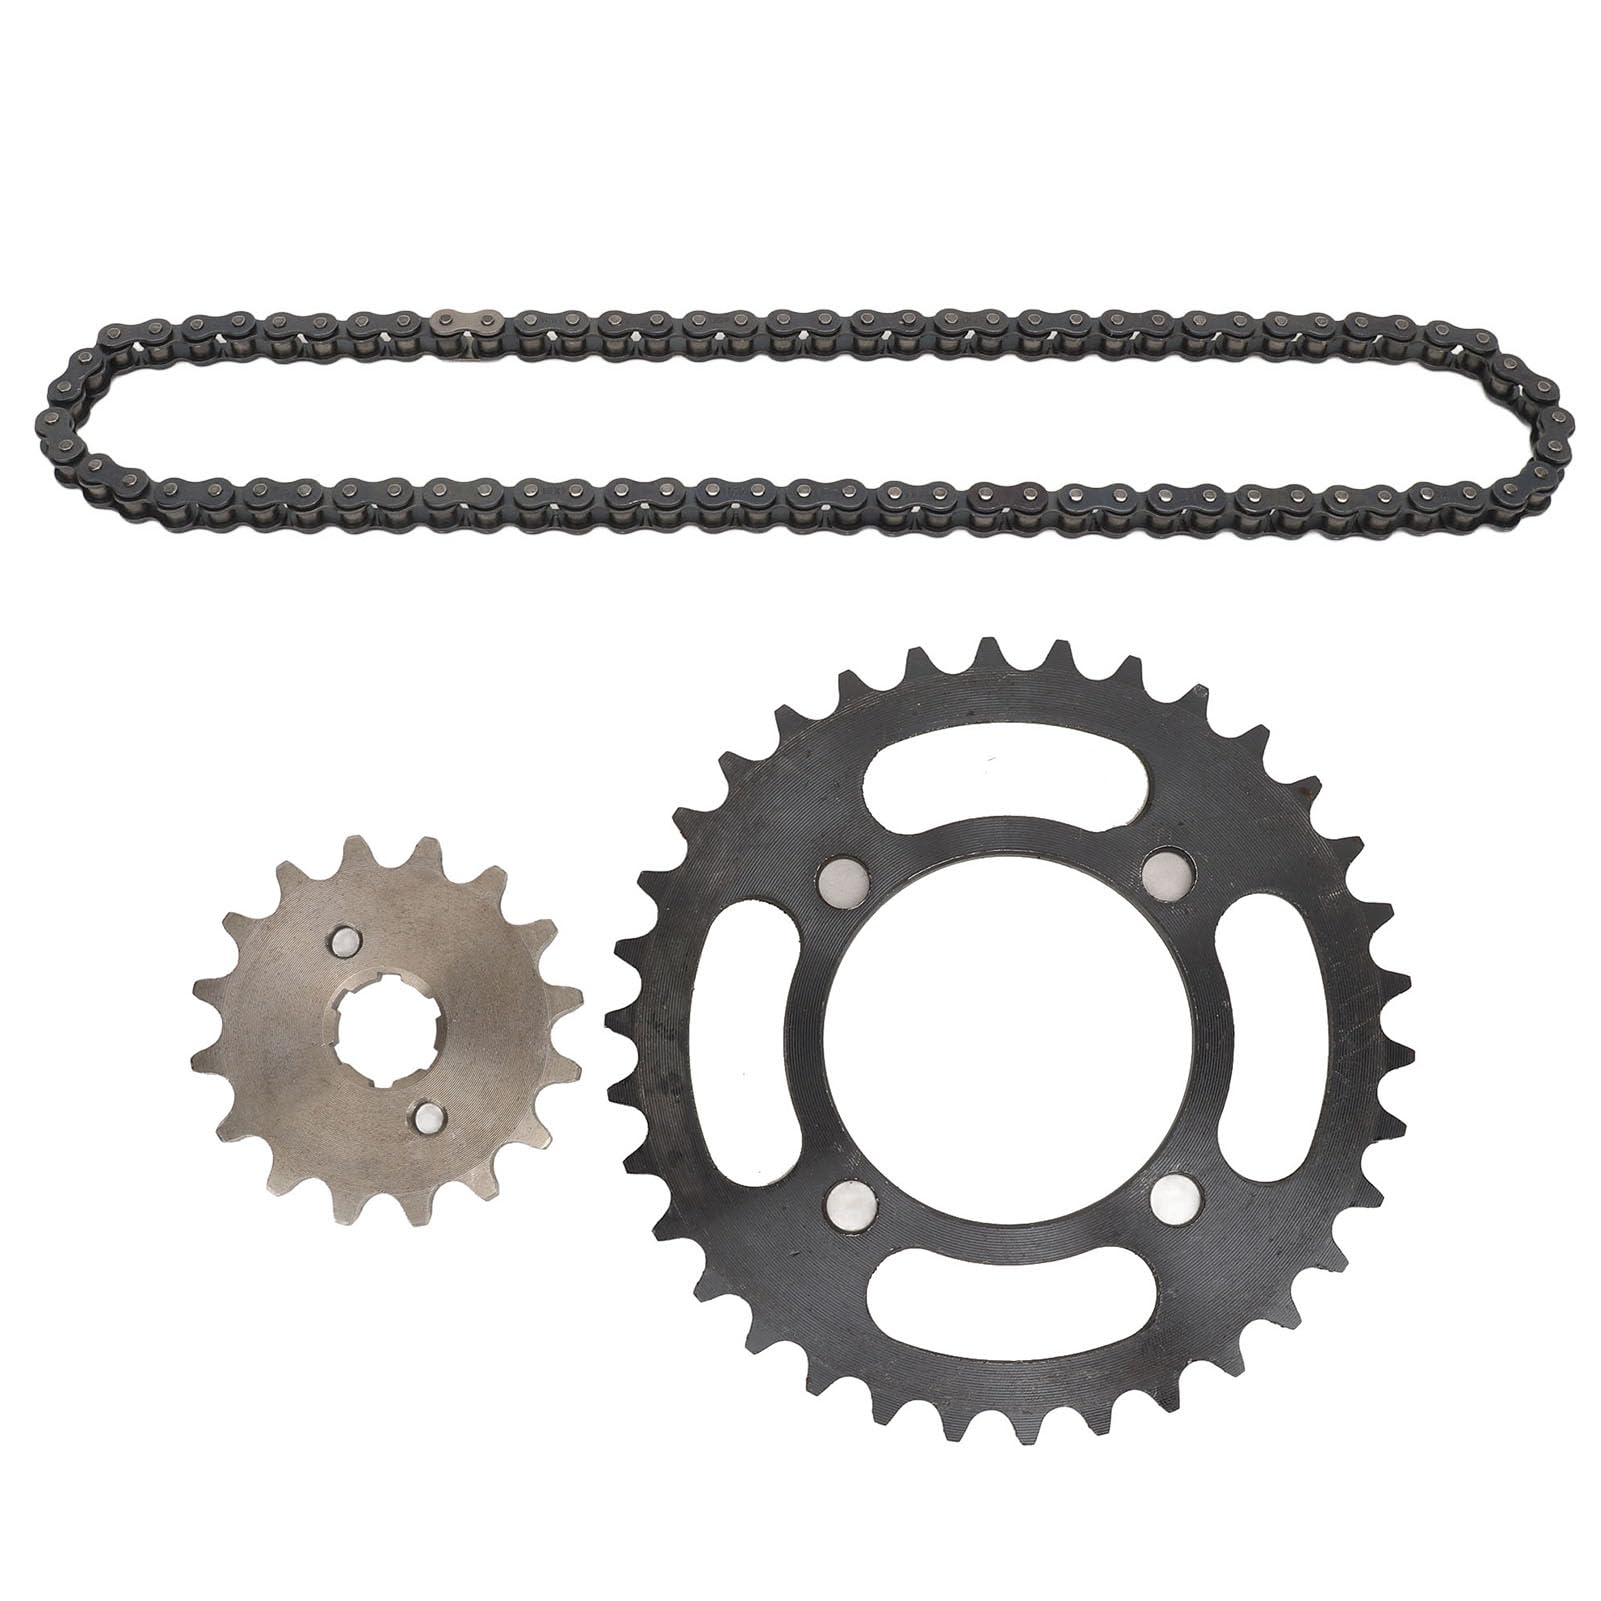 TANIQIACA 420 Steel Chain Sprocket Set 16T Front 34T Rear Sprockets with 60 Links Chain, for Off Road All Terrain Vehicles Modification, Enhances Performance Durability von TANIQIACA